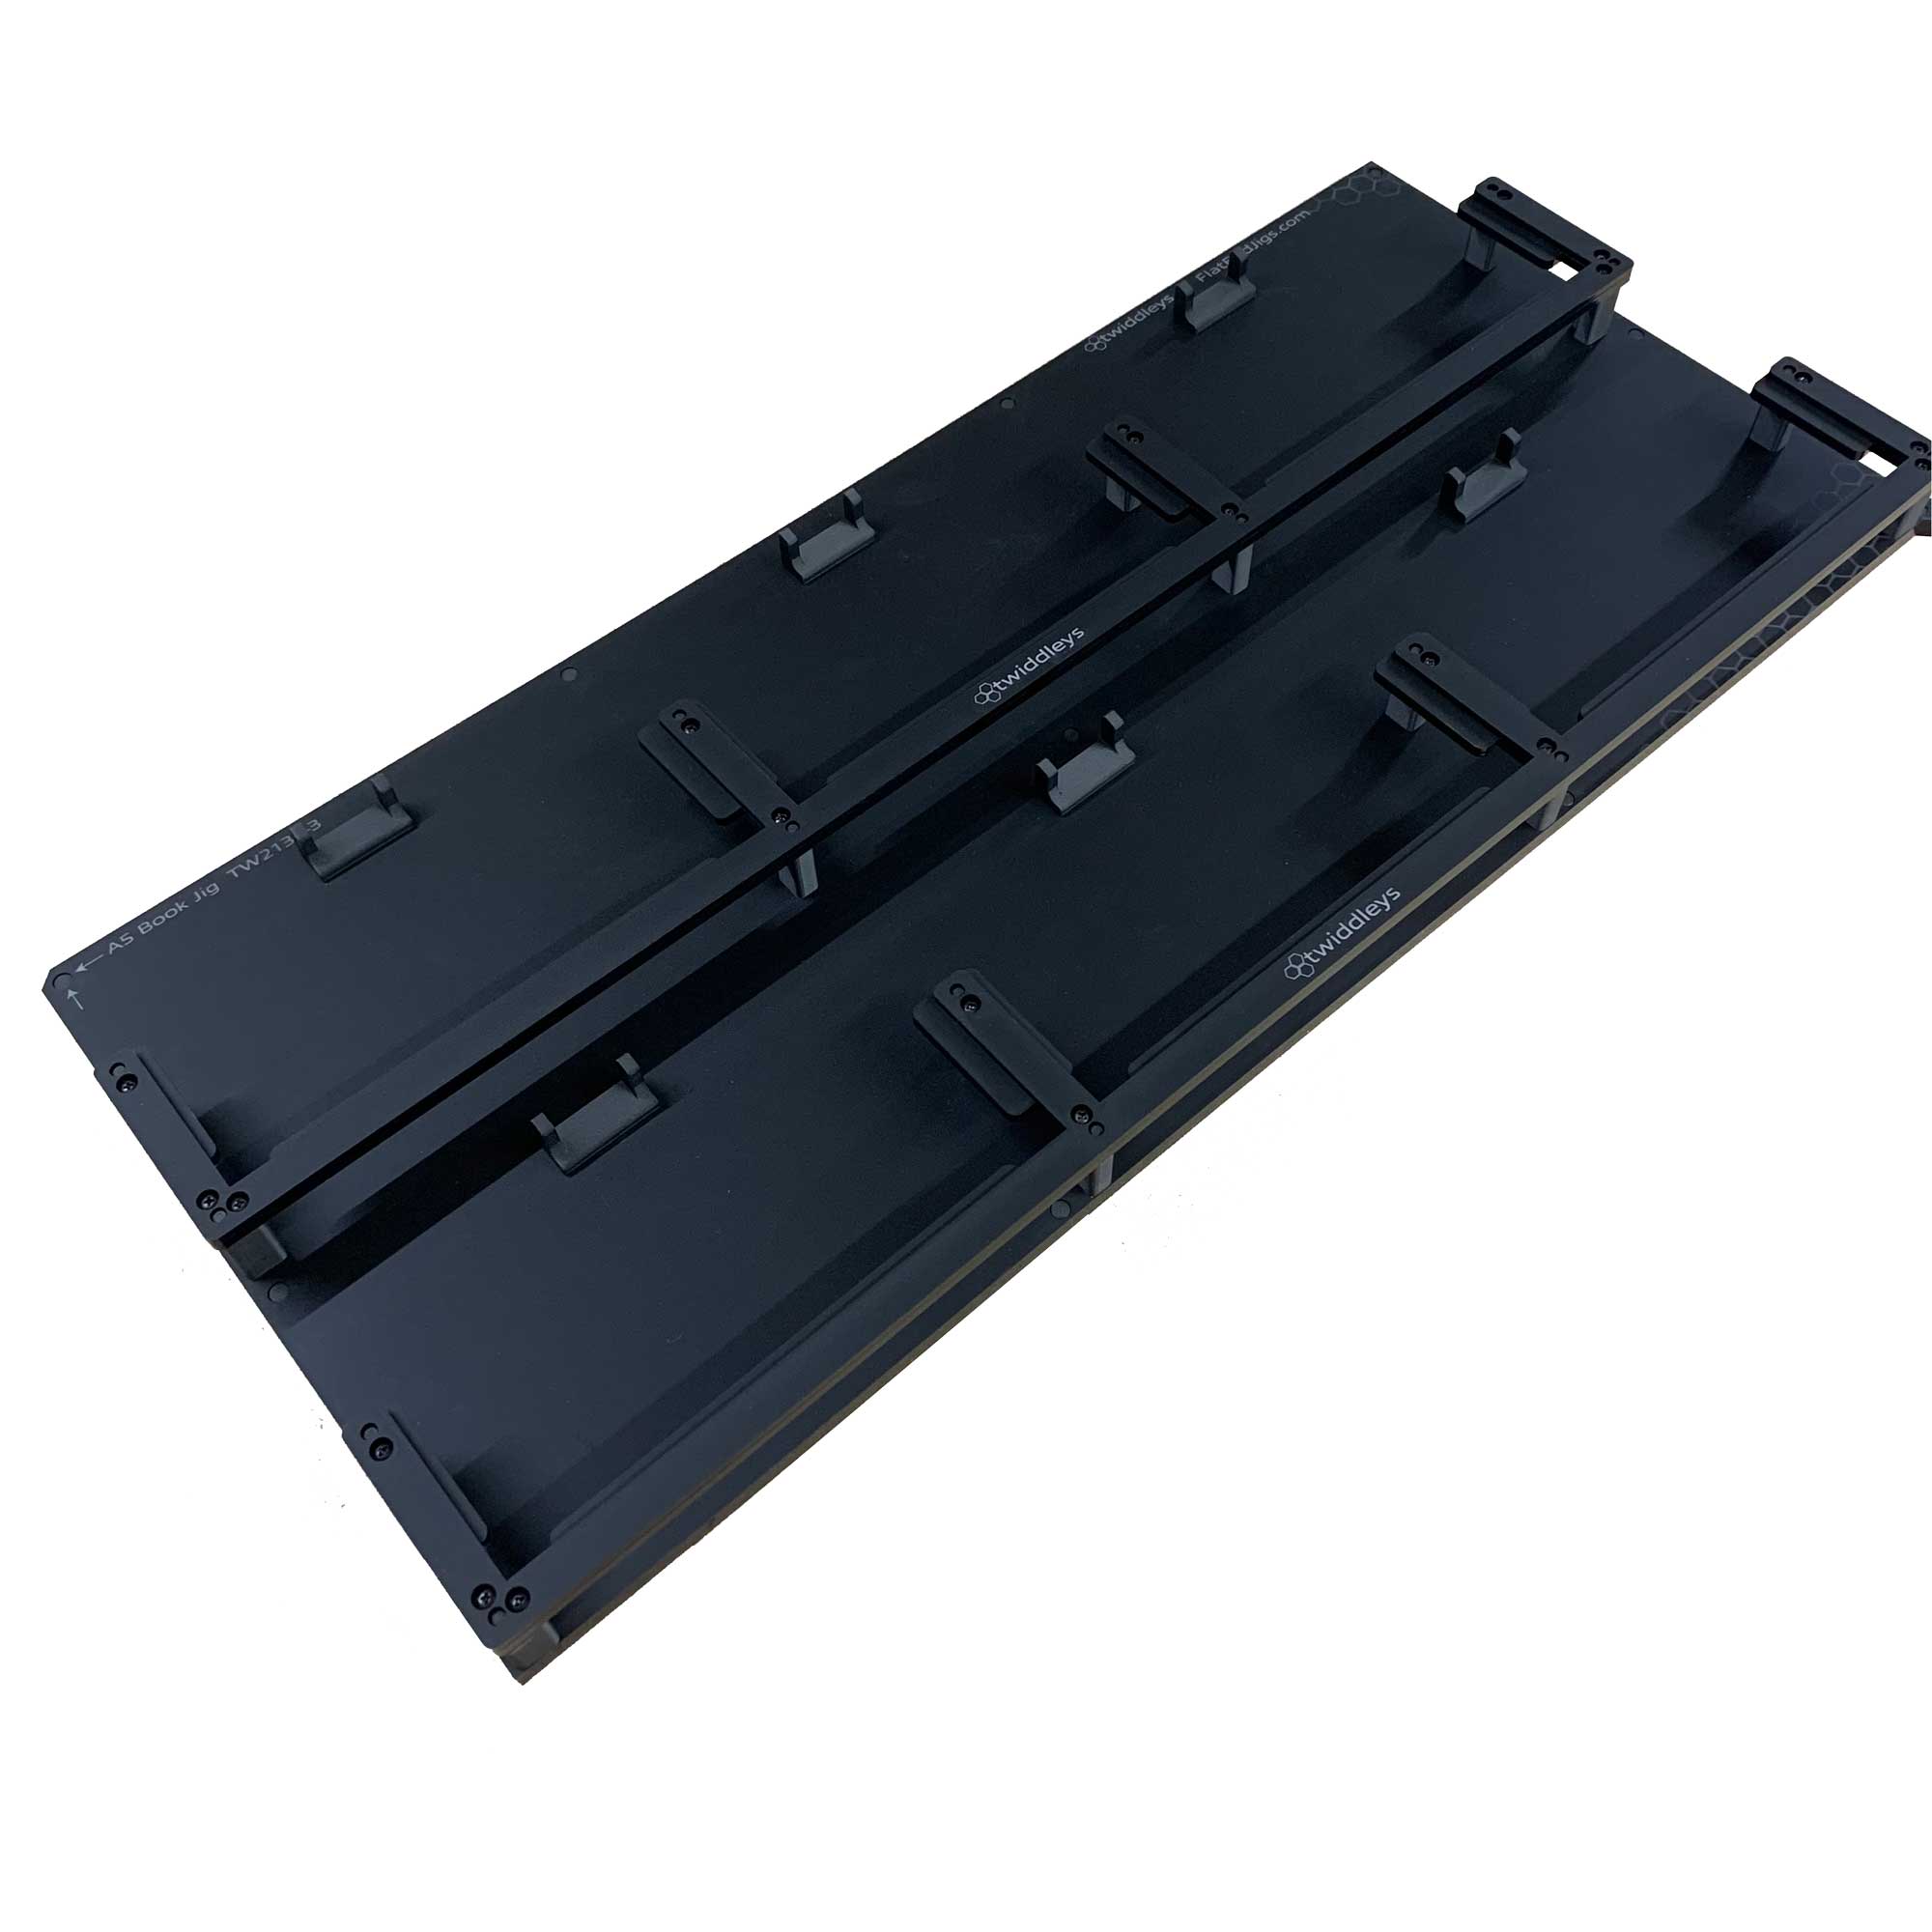 Notebook Printing Jig (145mm x 215mm) for Mutoh XPJ-661UF Flatbed Printer (xx Spaces)